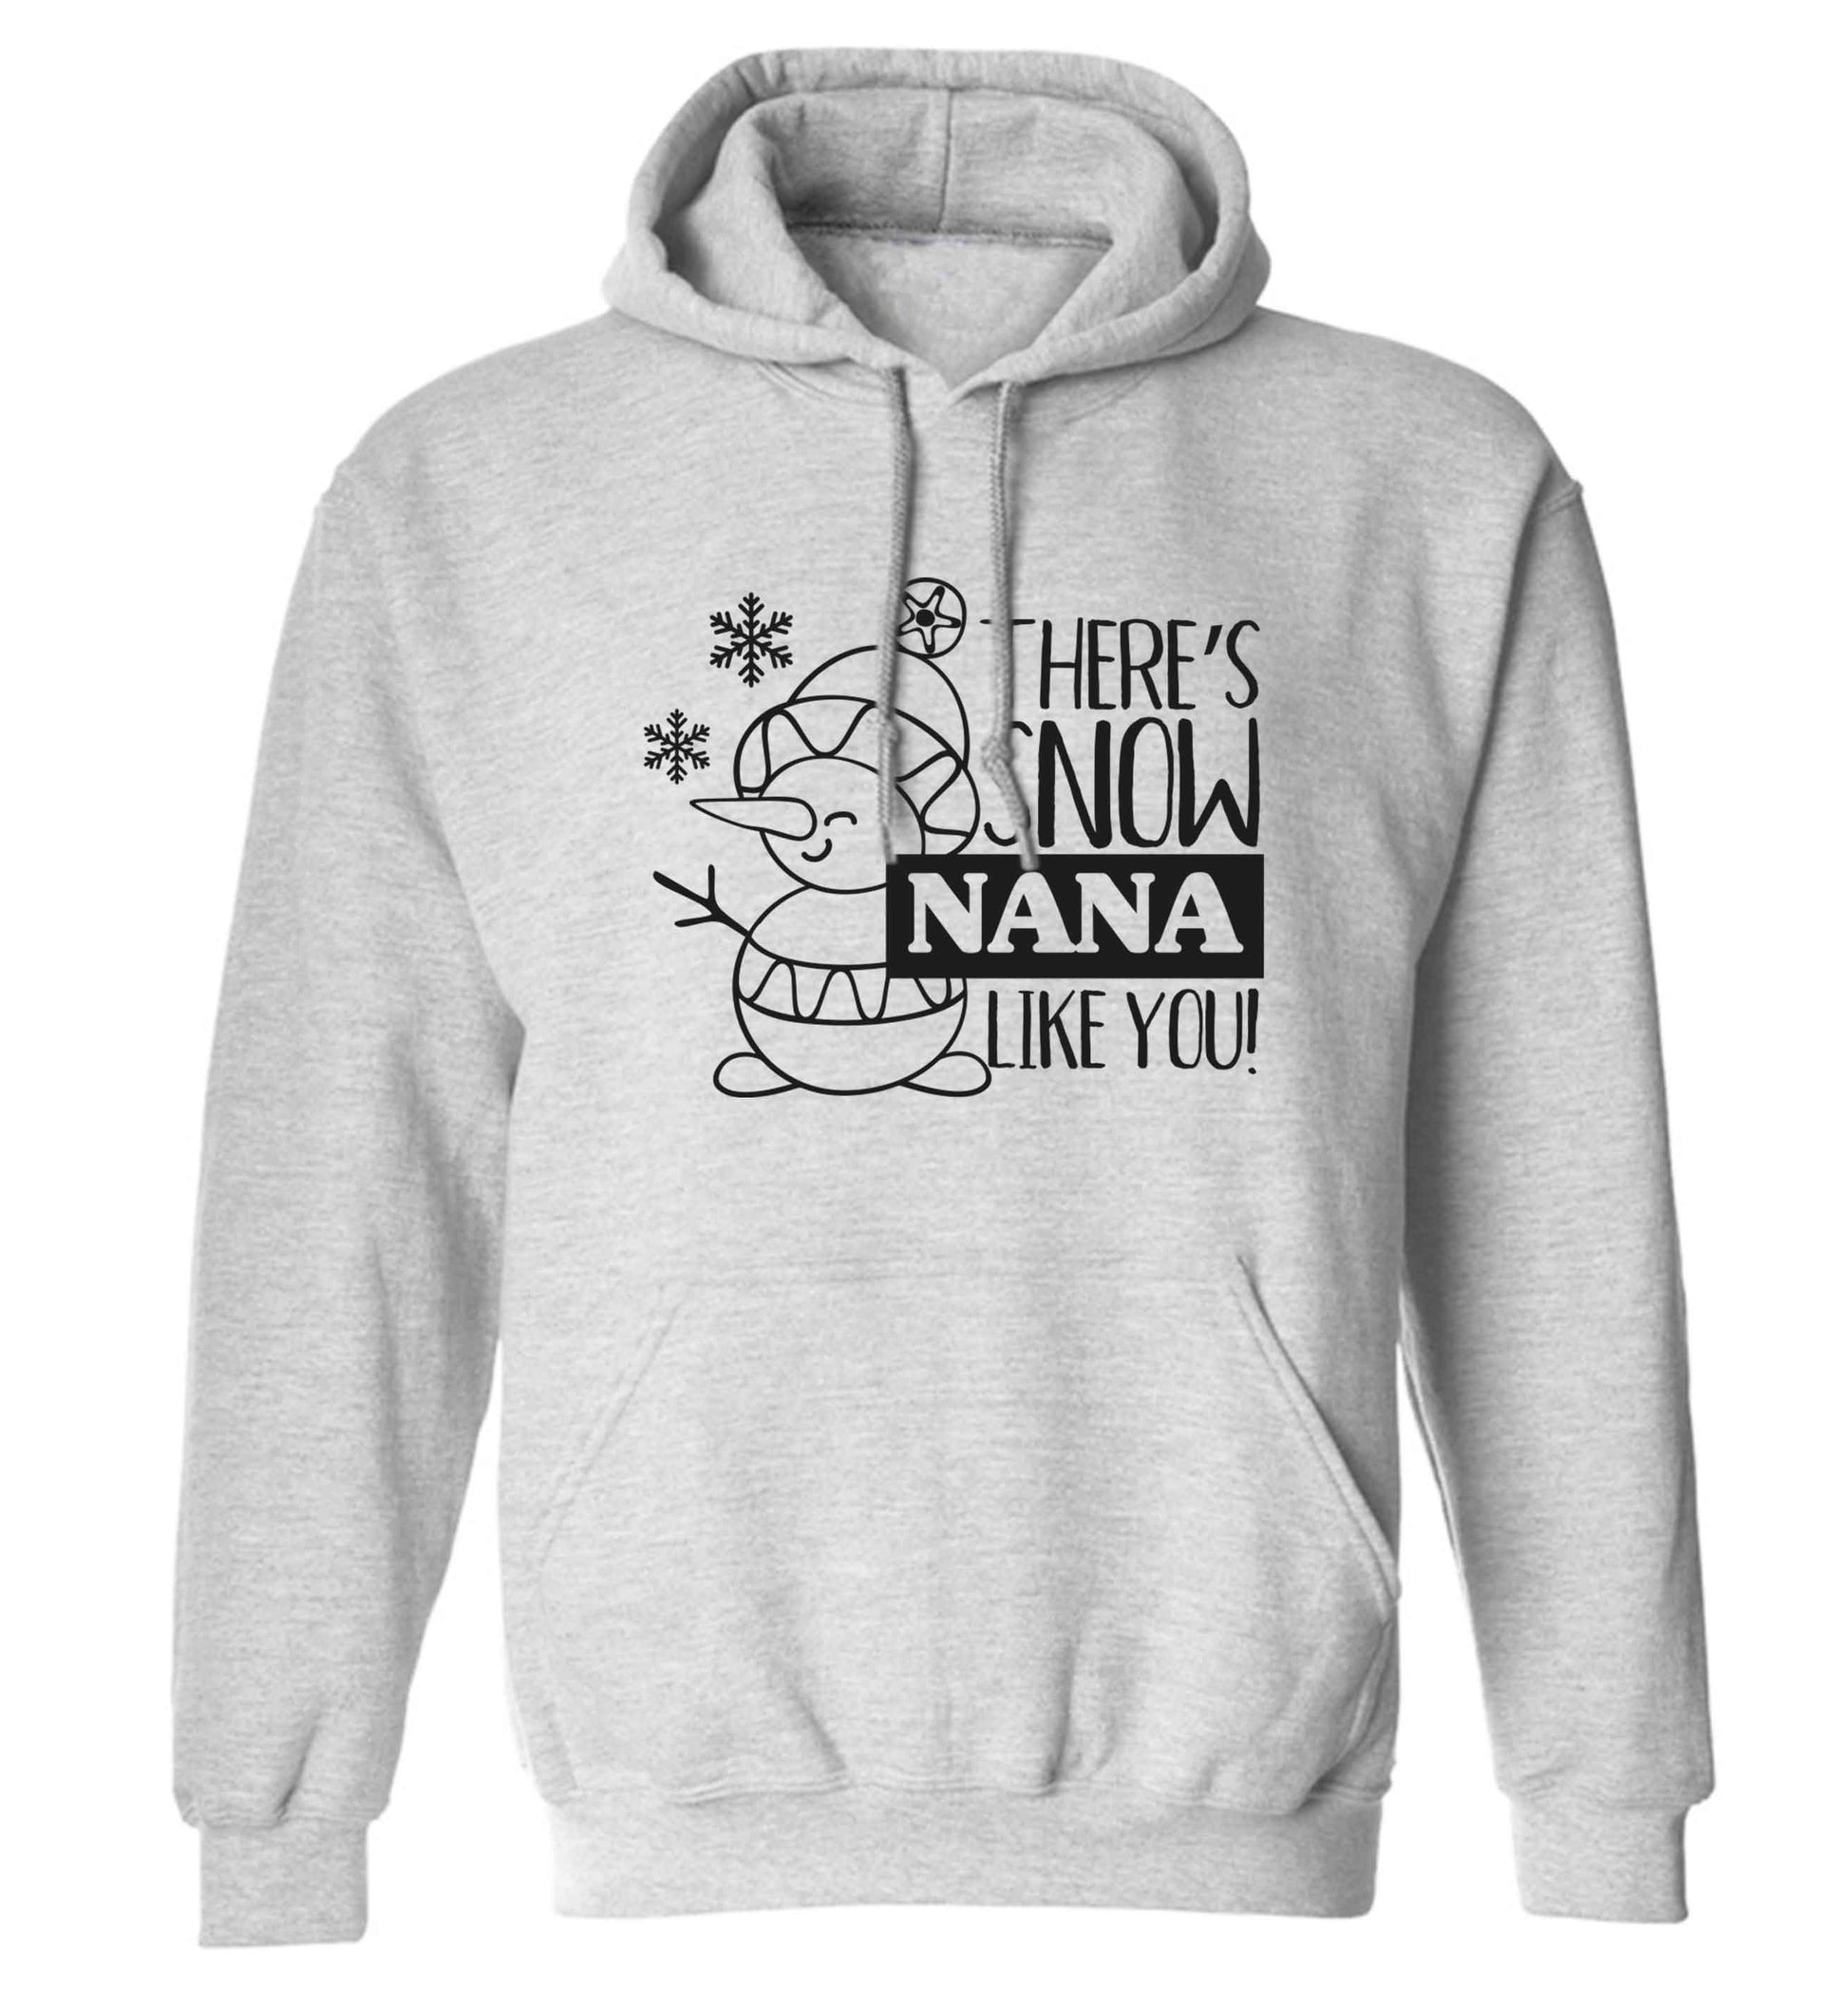 There's snow nana like you adults unisex grey hoodie 2XL